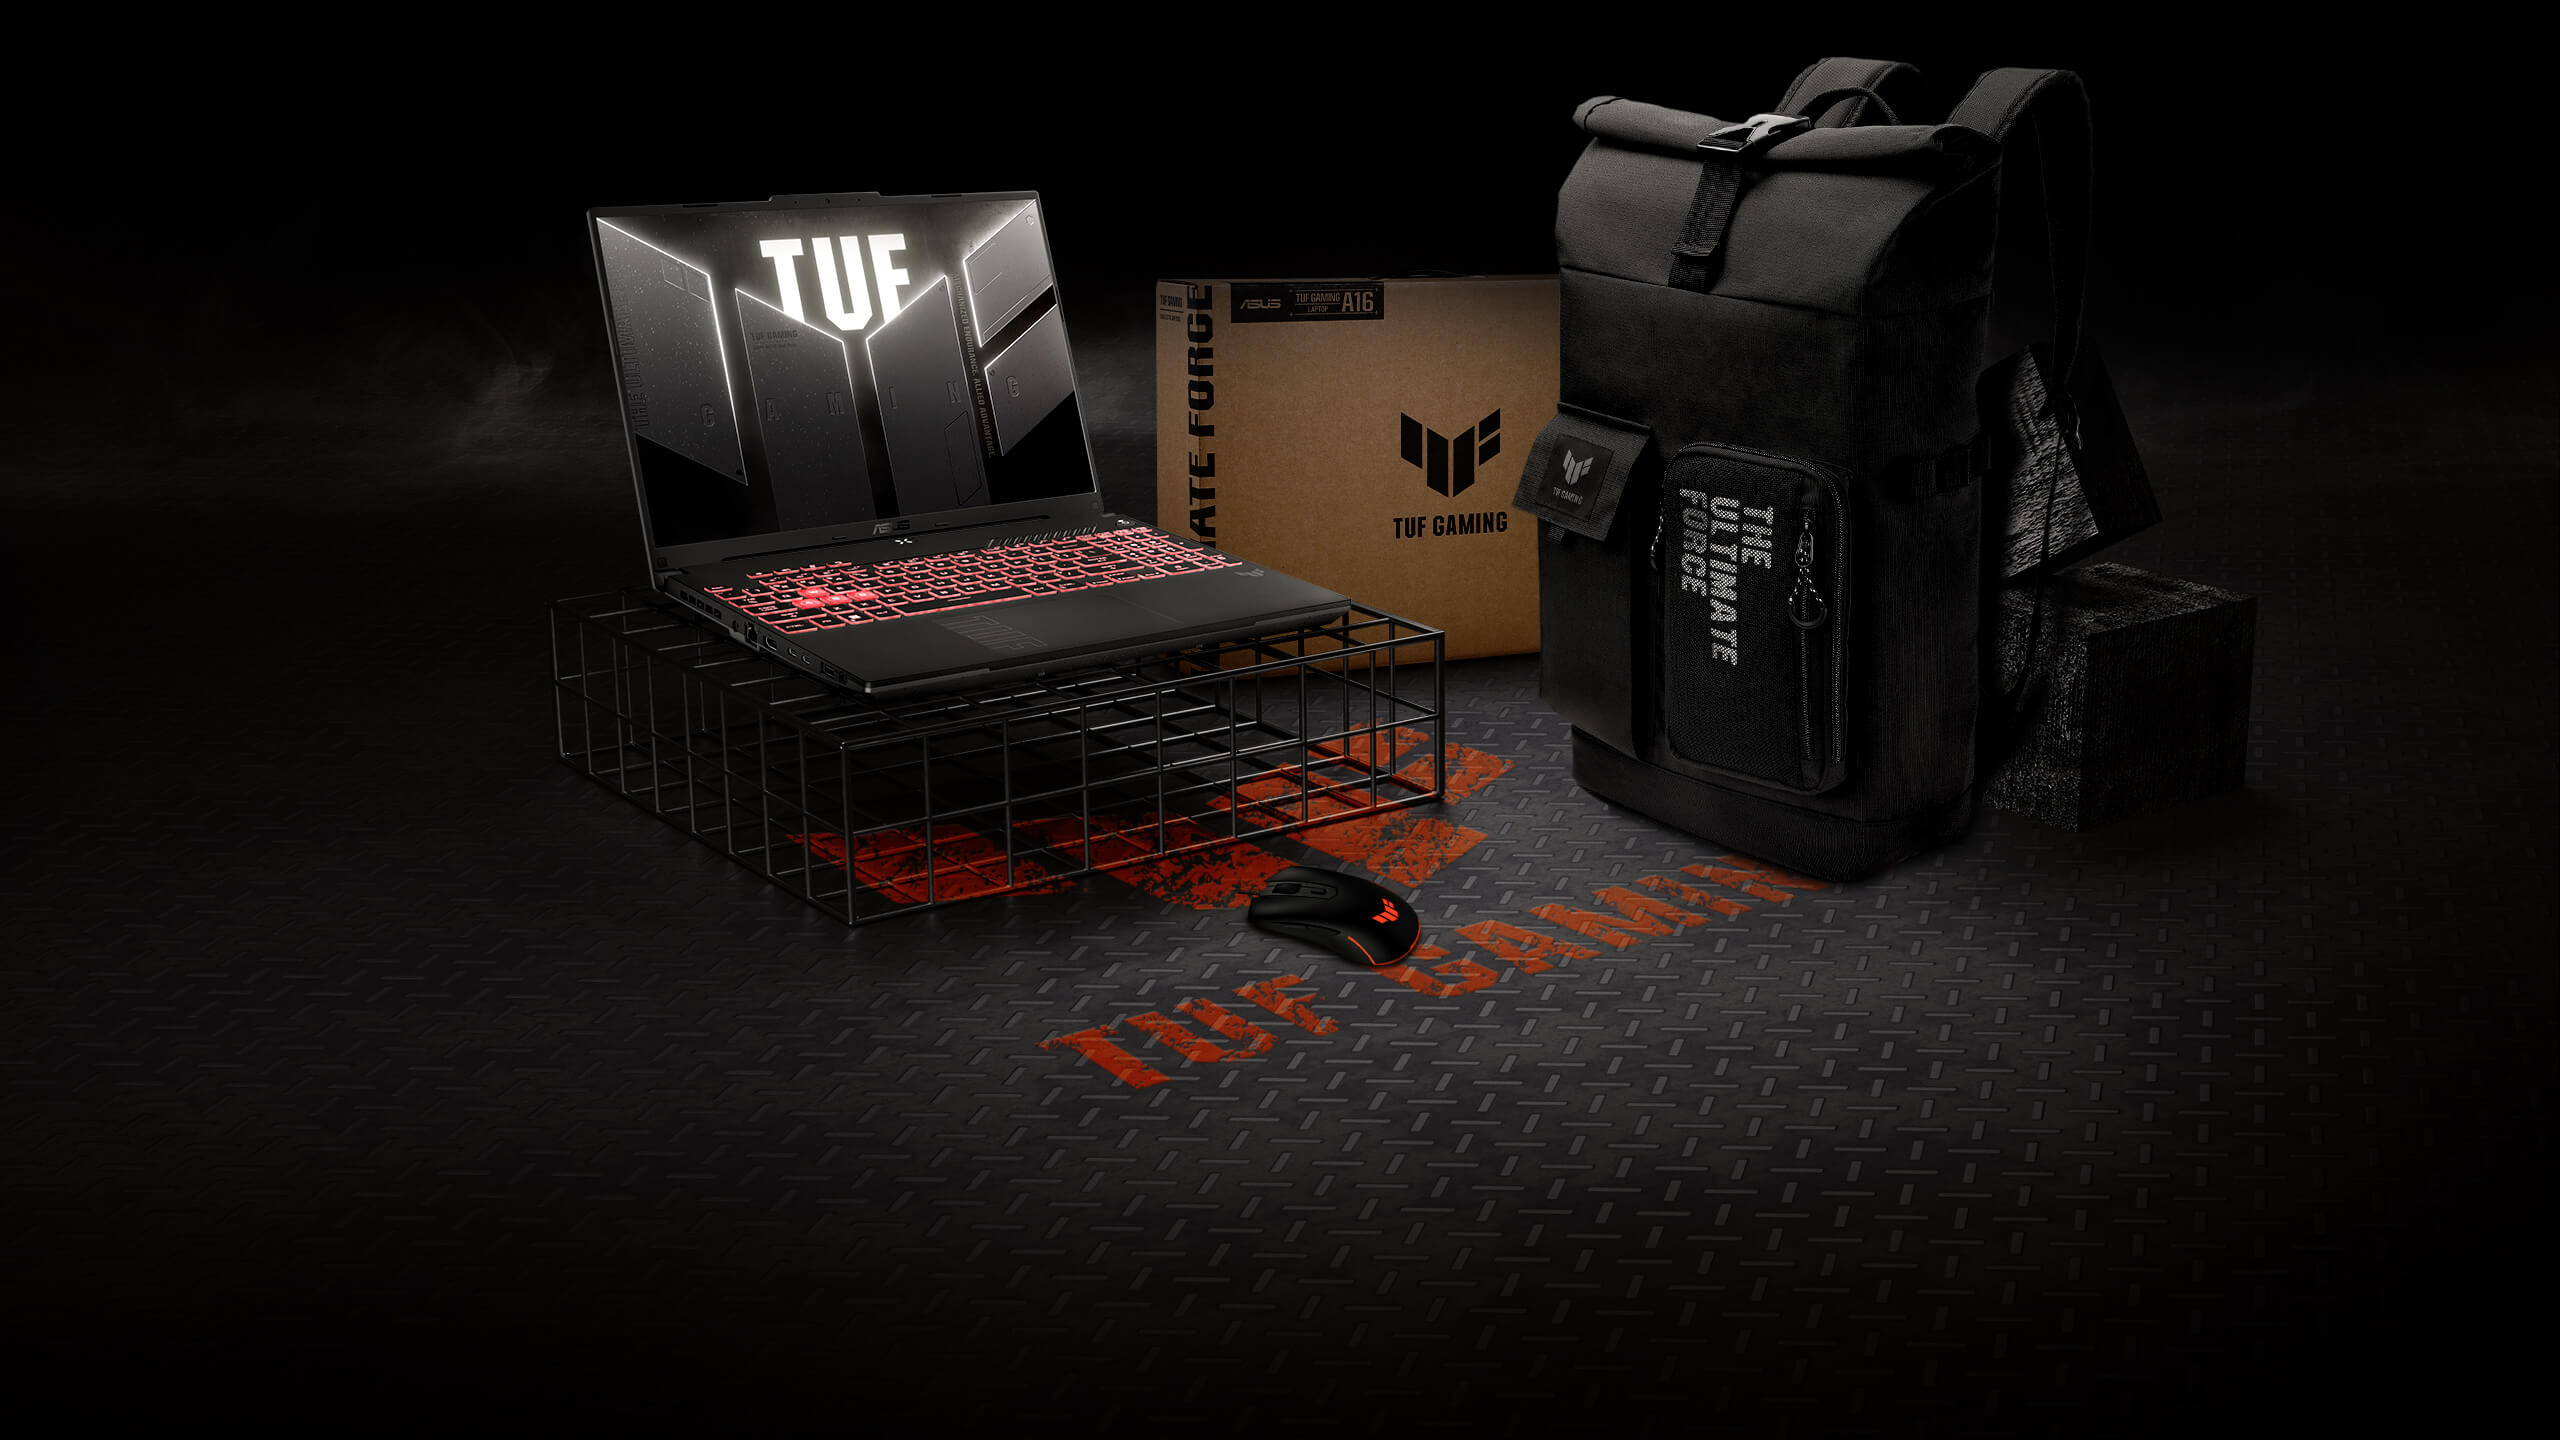 The TUF Gaming A16 on a wire frame, with a TUF Gaming mouse and TUF Gaming backpack arranged near it.